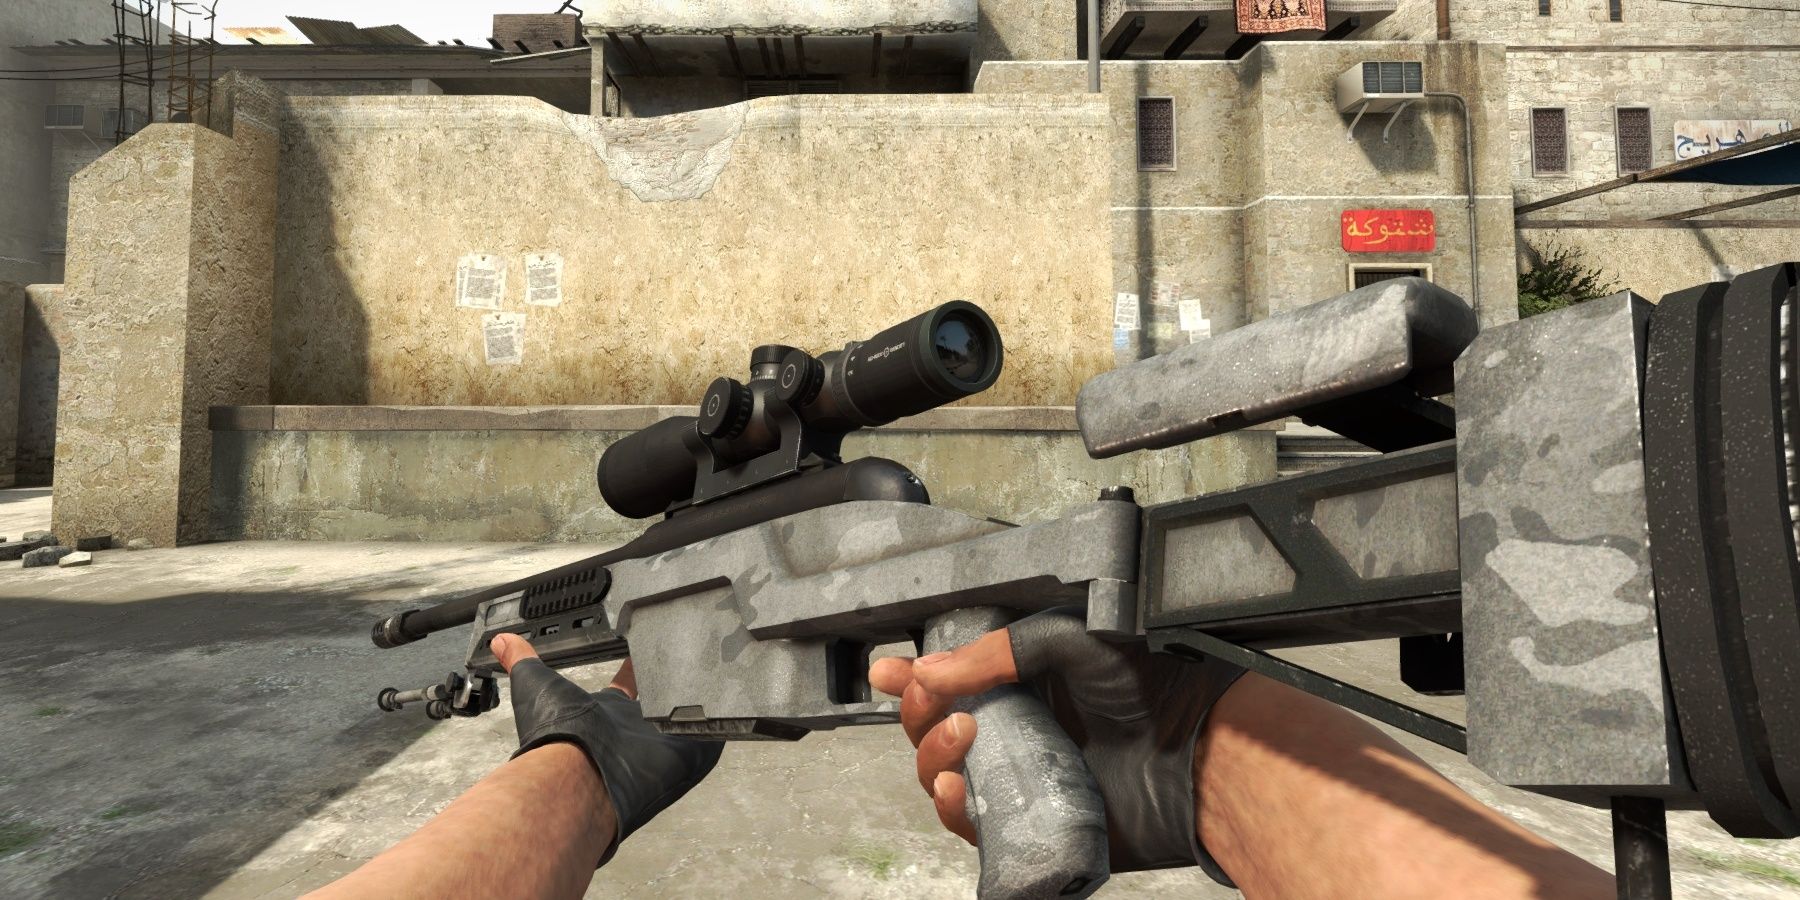 The SSG 08 in Counter-Strike: Global Offensive